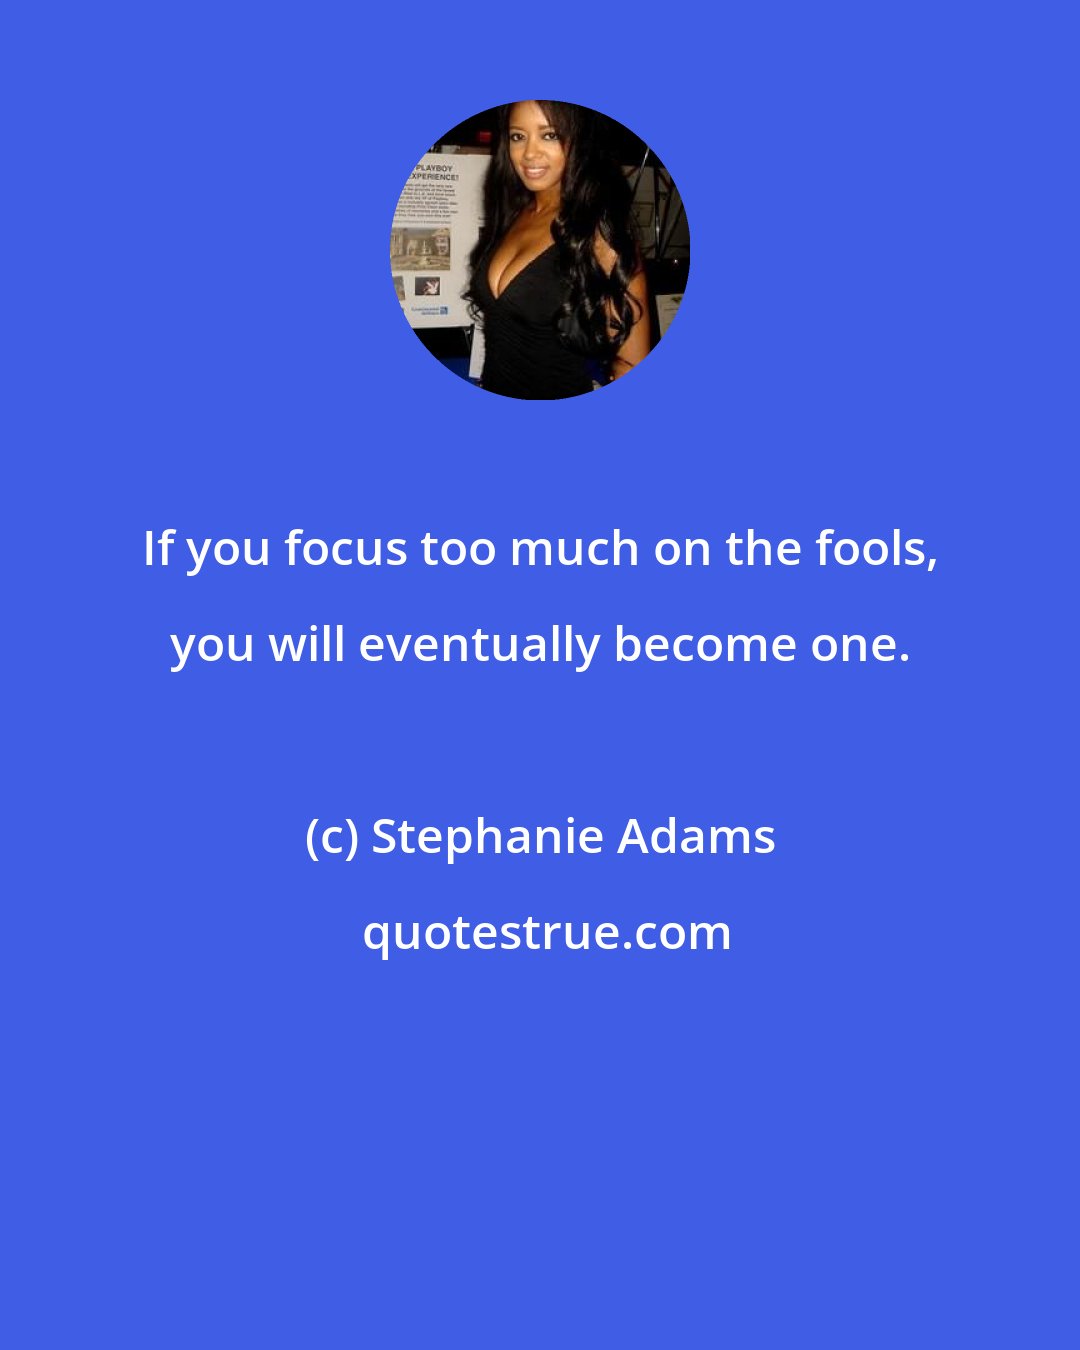 Stephanie Adams: If you focus too much on the fools, you will eventually become one.